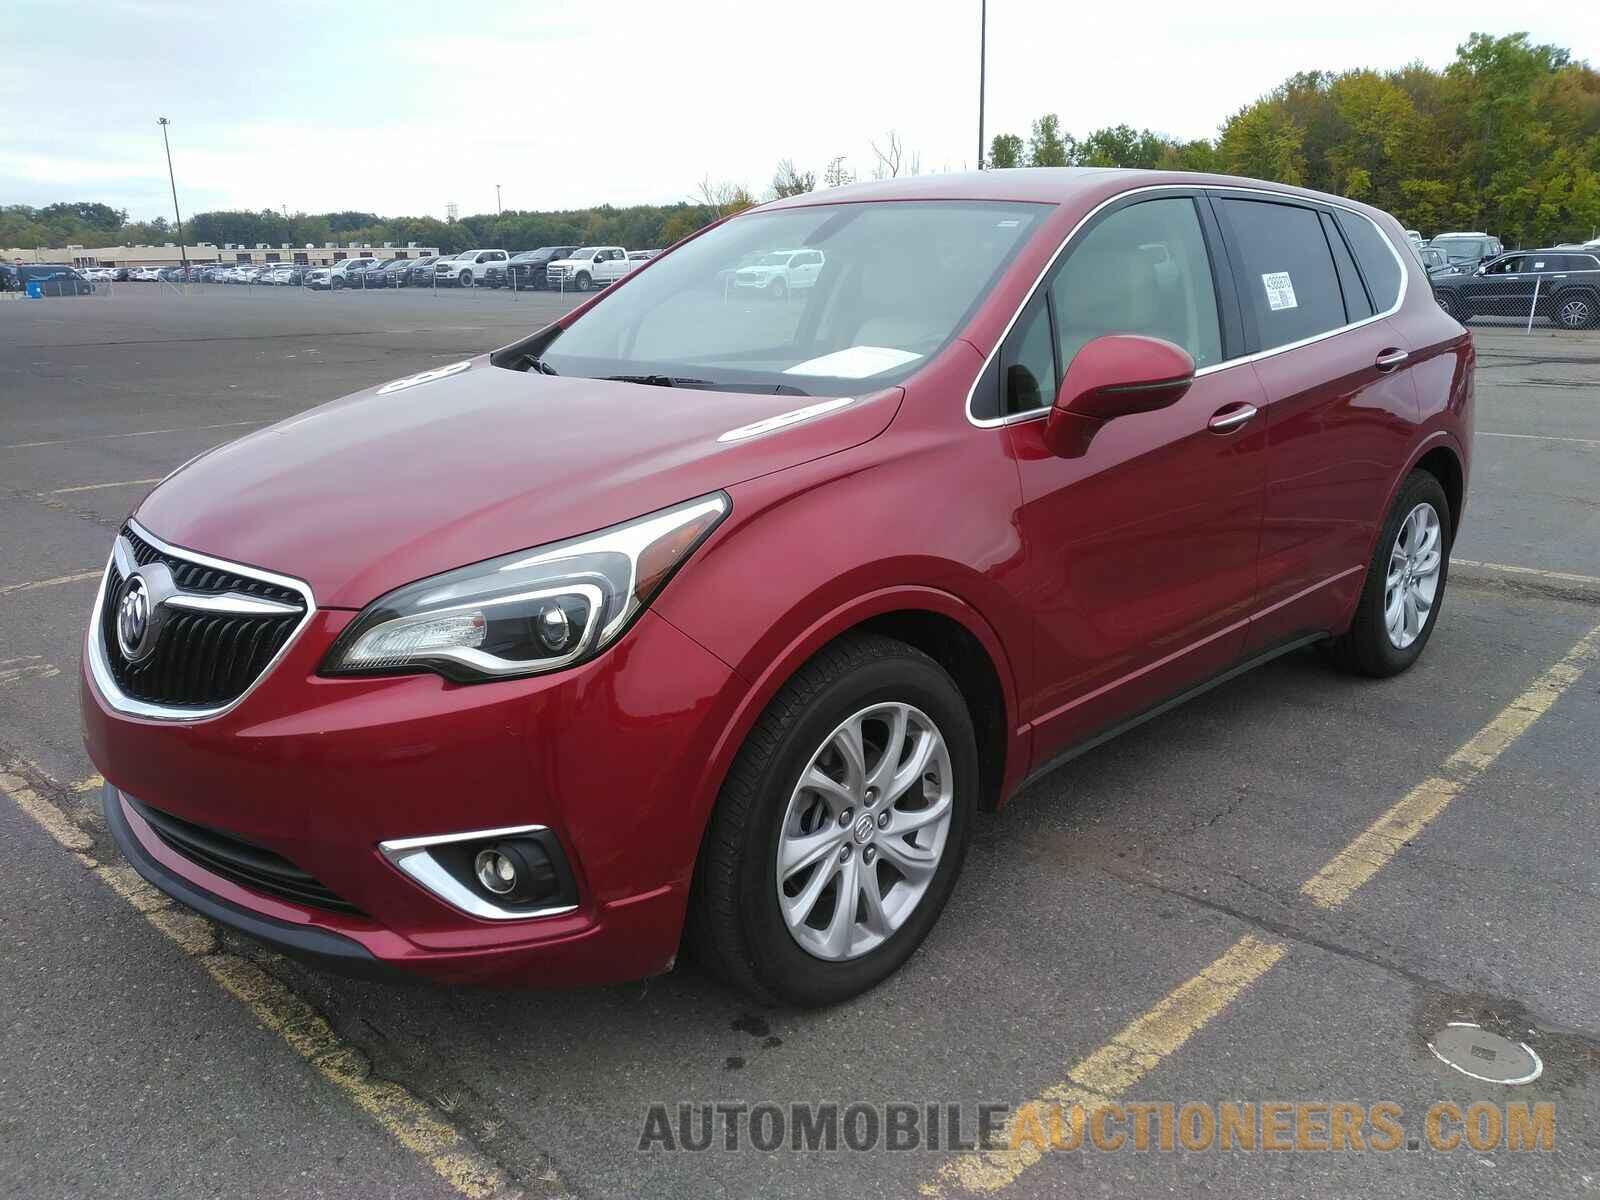 LRBFXBSAXKD024484 Buick Envision 2019